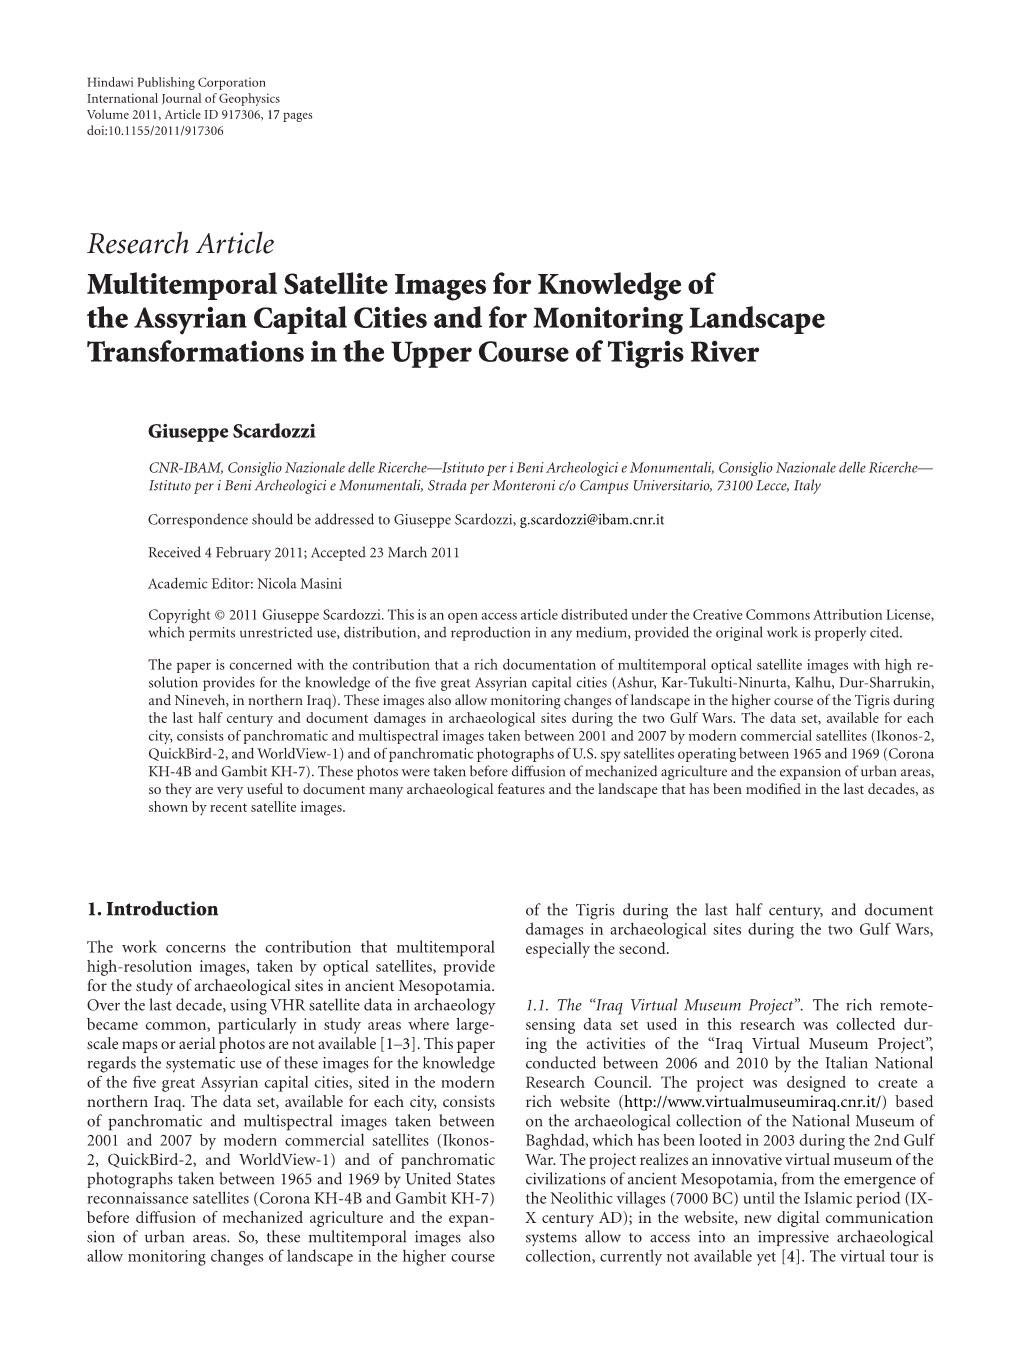 Multitemporal Satellite Images for Knowledge of the Assyrian Capital Cities and for Monitoring Landscape Transformations in the Upper Course of Tigris River